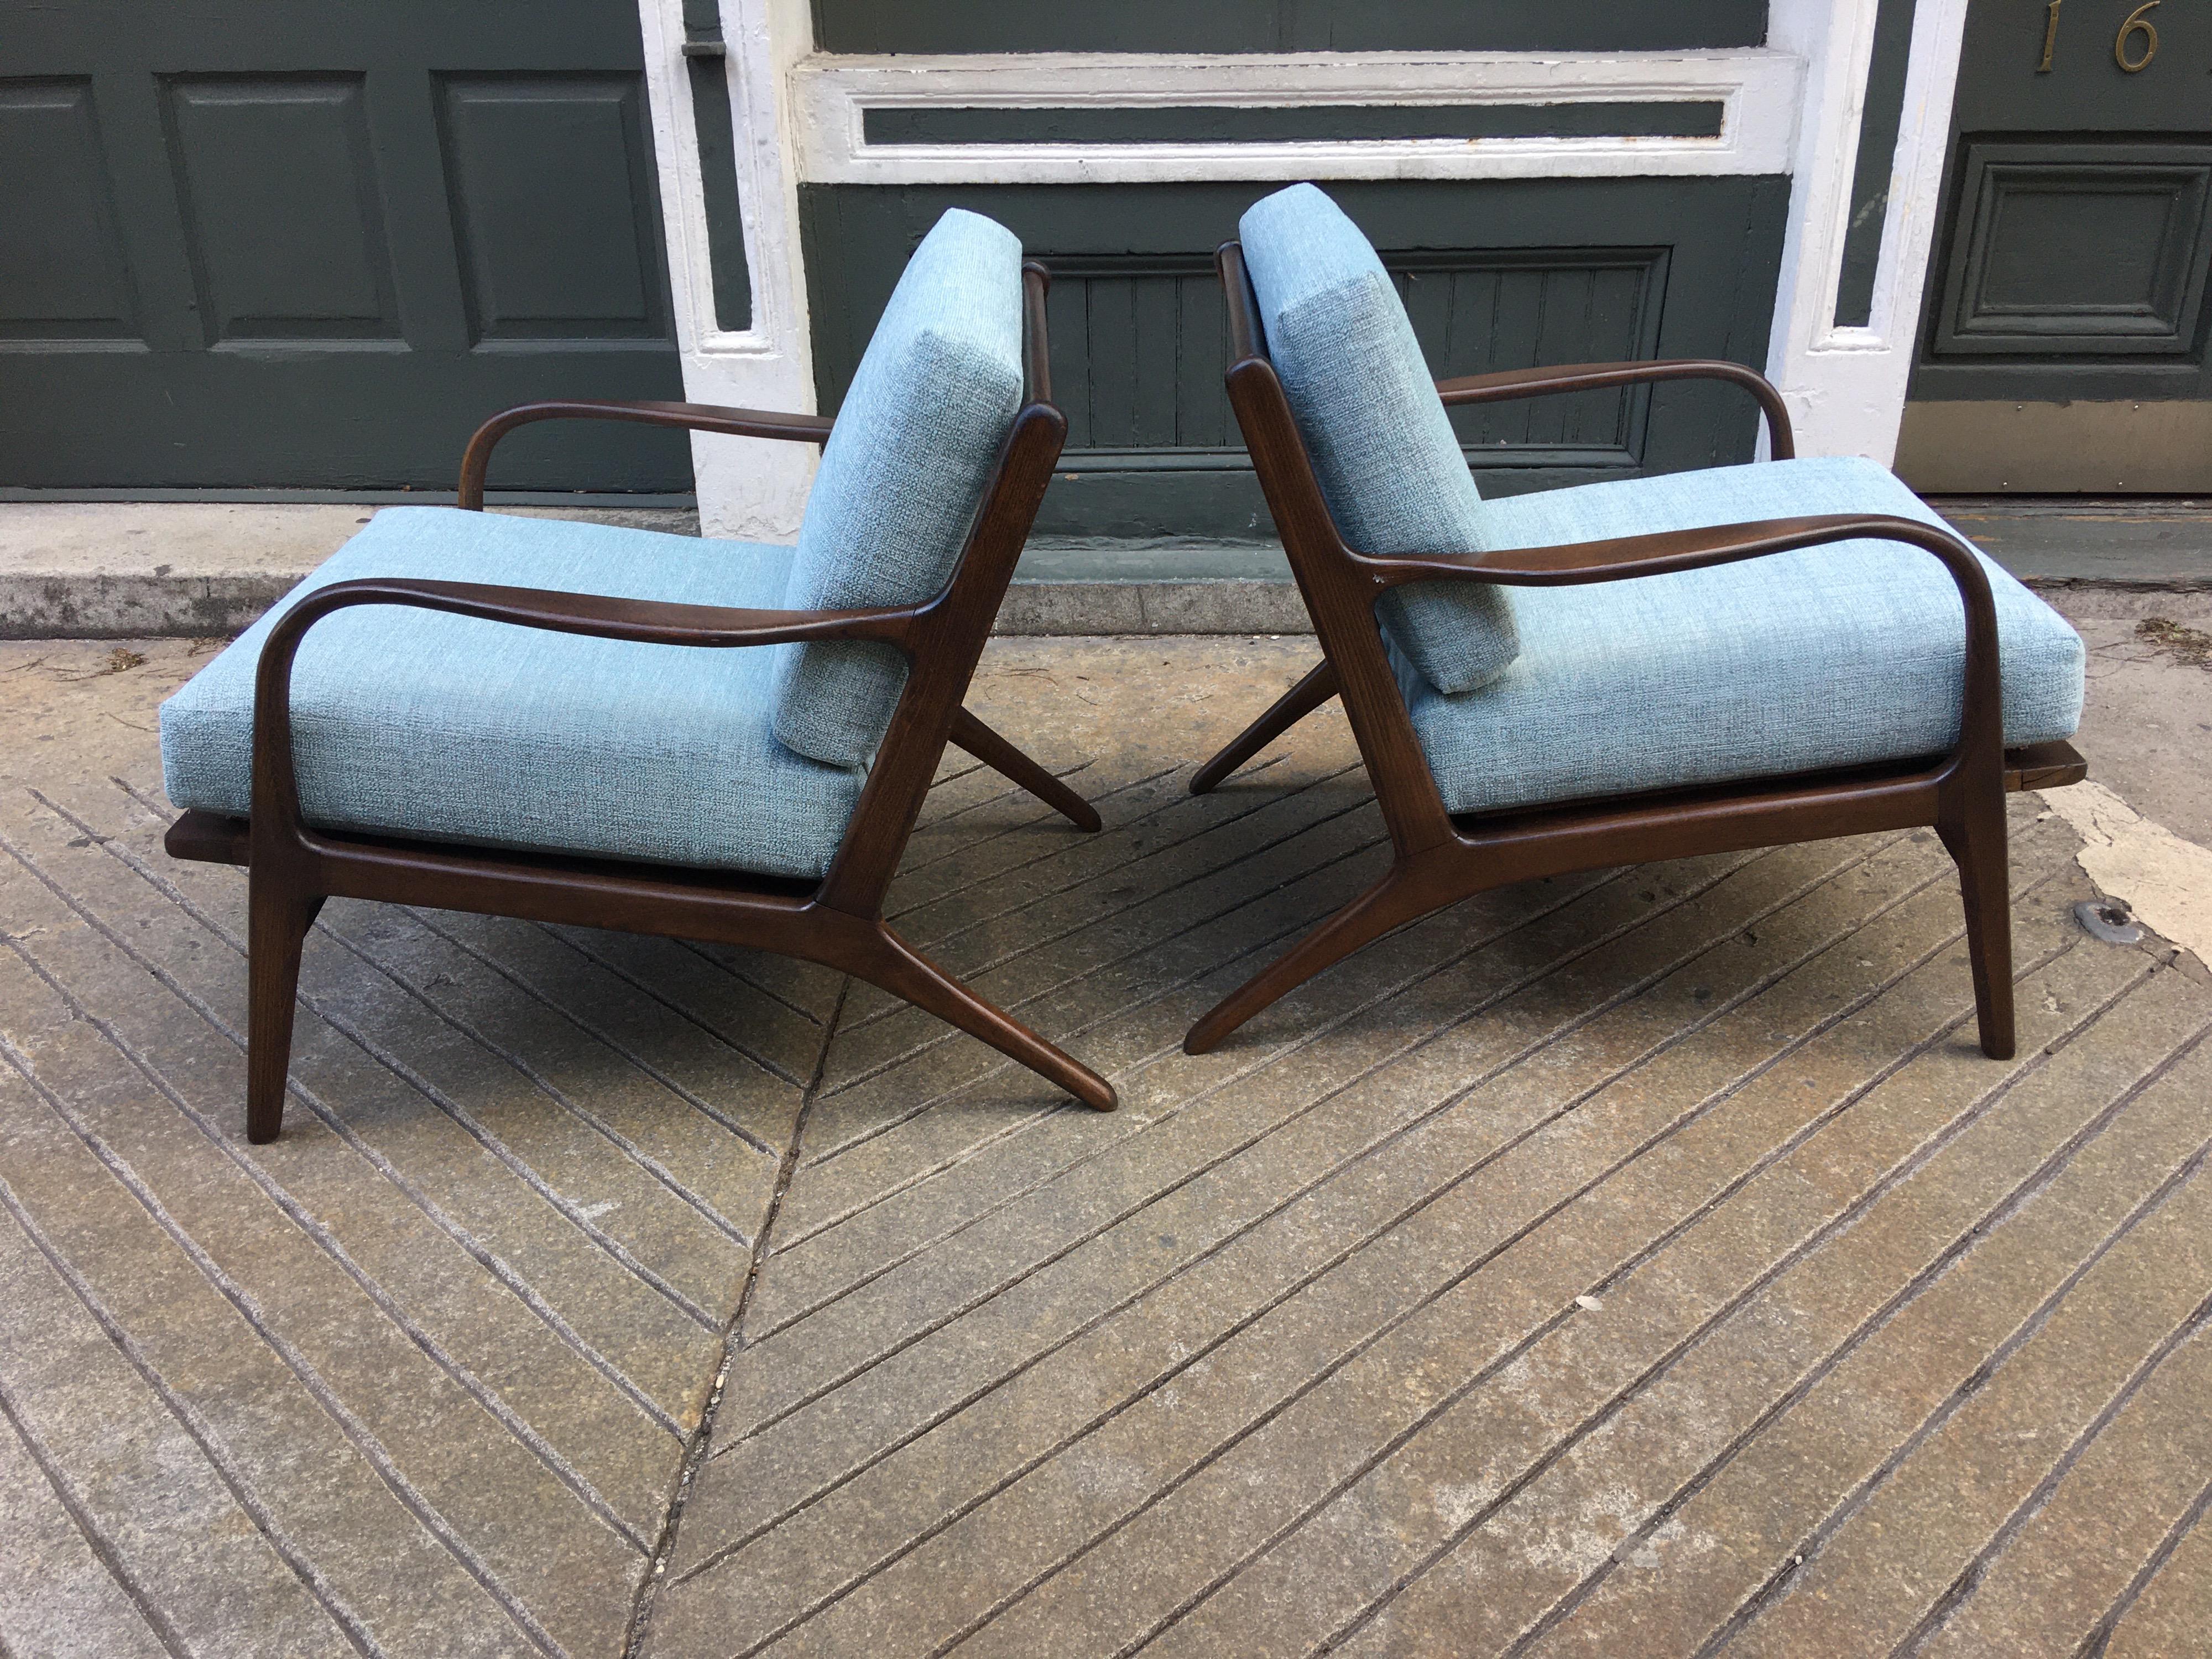 Pair of midcentury open armchairs. Newly refinished and reupholstered! Chairs were produced in Yugoslavia probably in the late 1960s or early 1970s. Chairs break down, originally done this way to save importing costs! But now perfect to get into